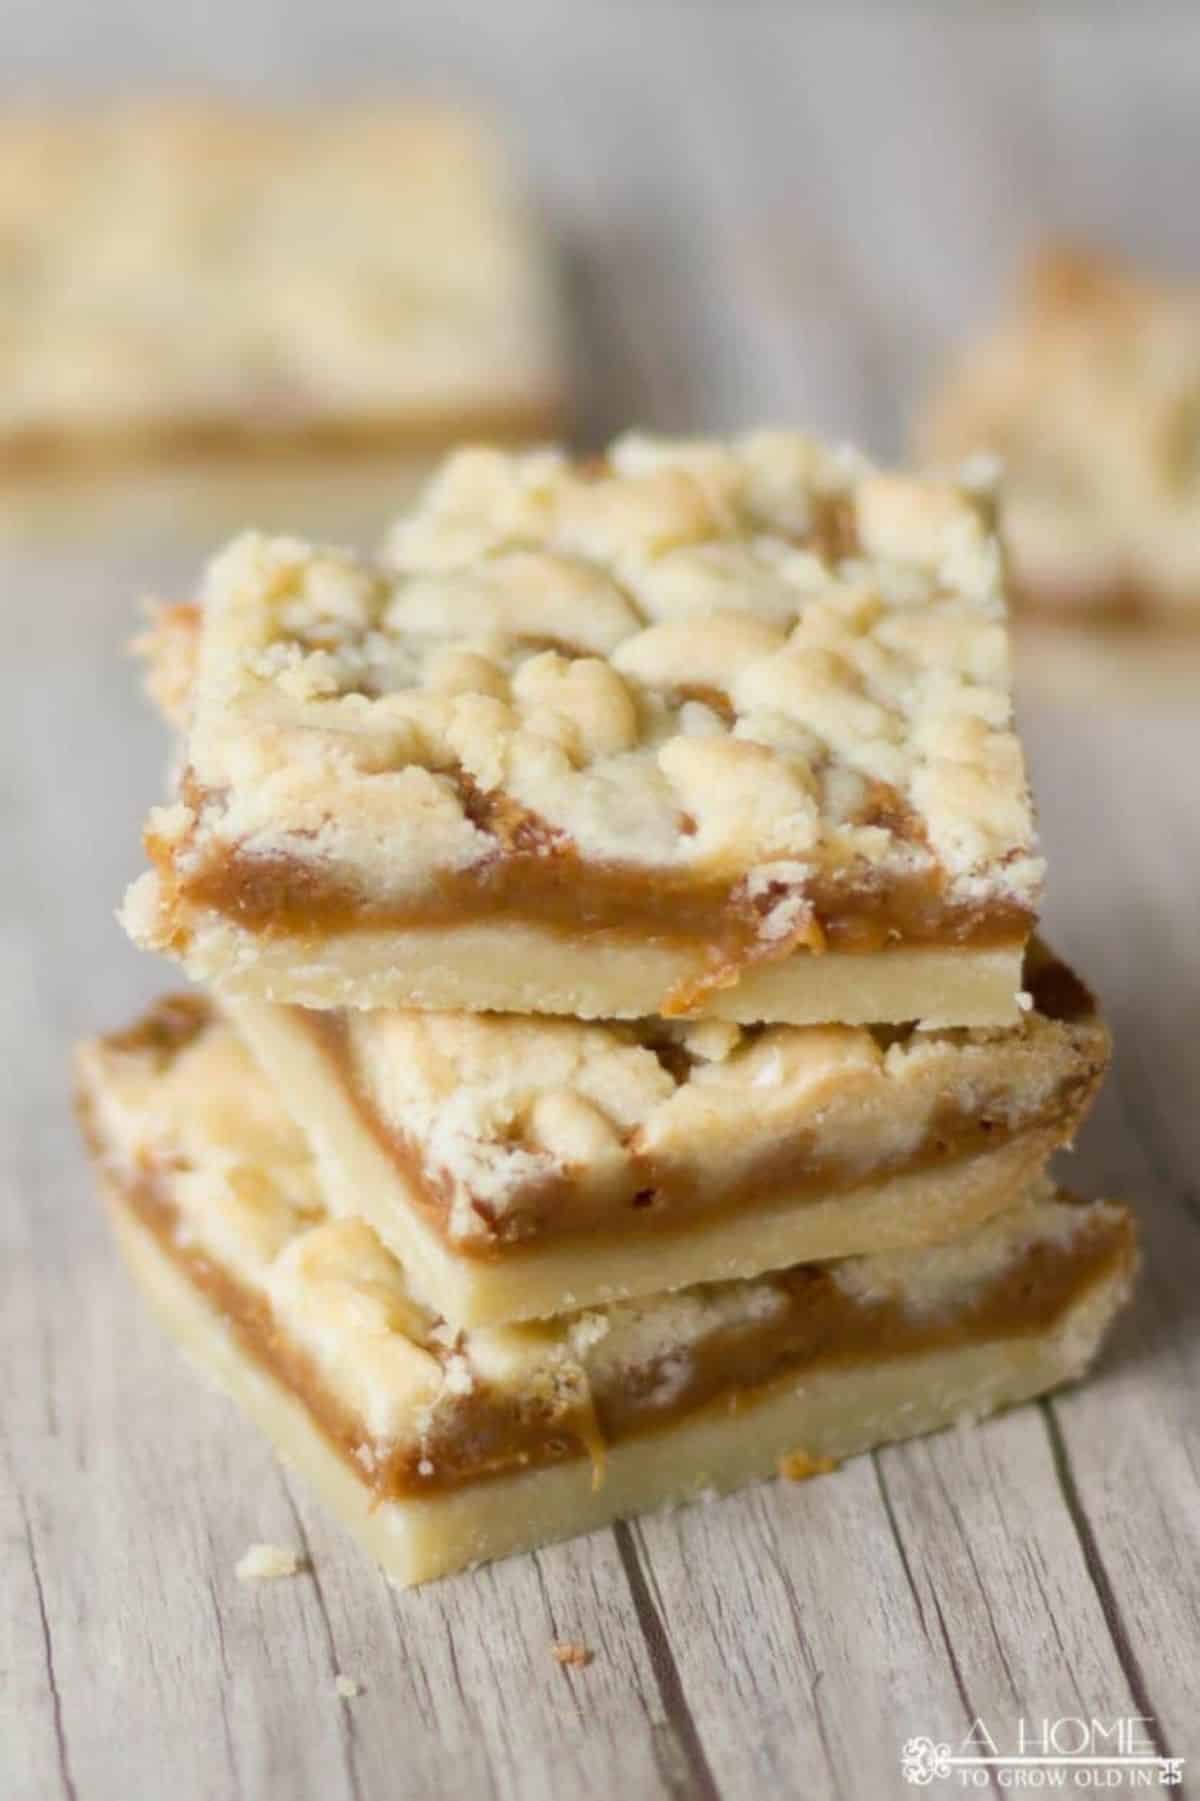 A stack of salted caramel butter bars on a wooden table.